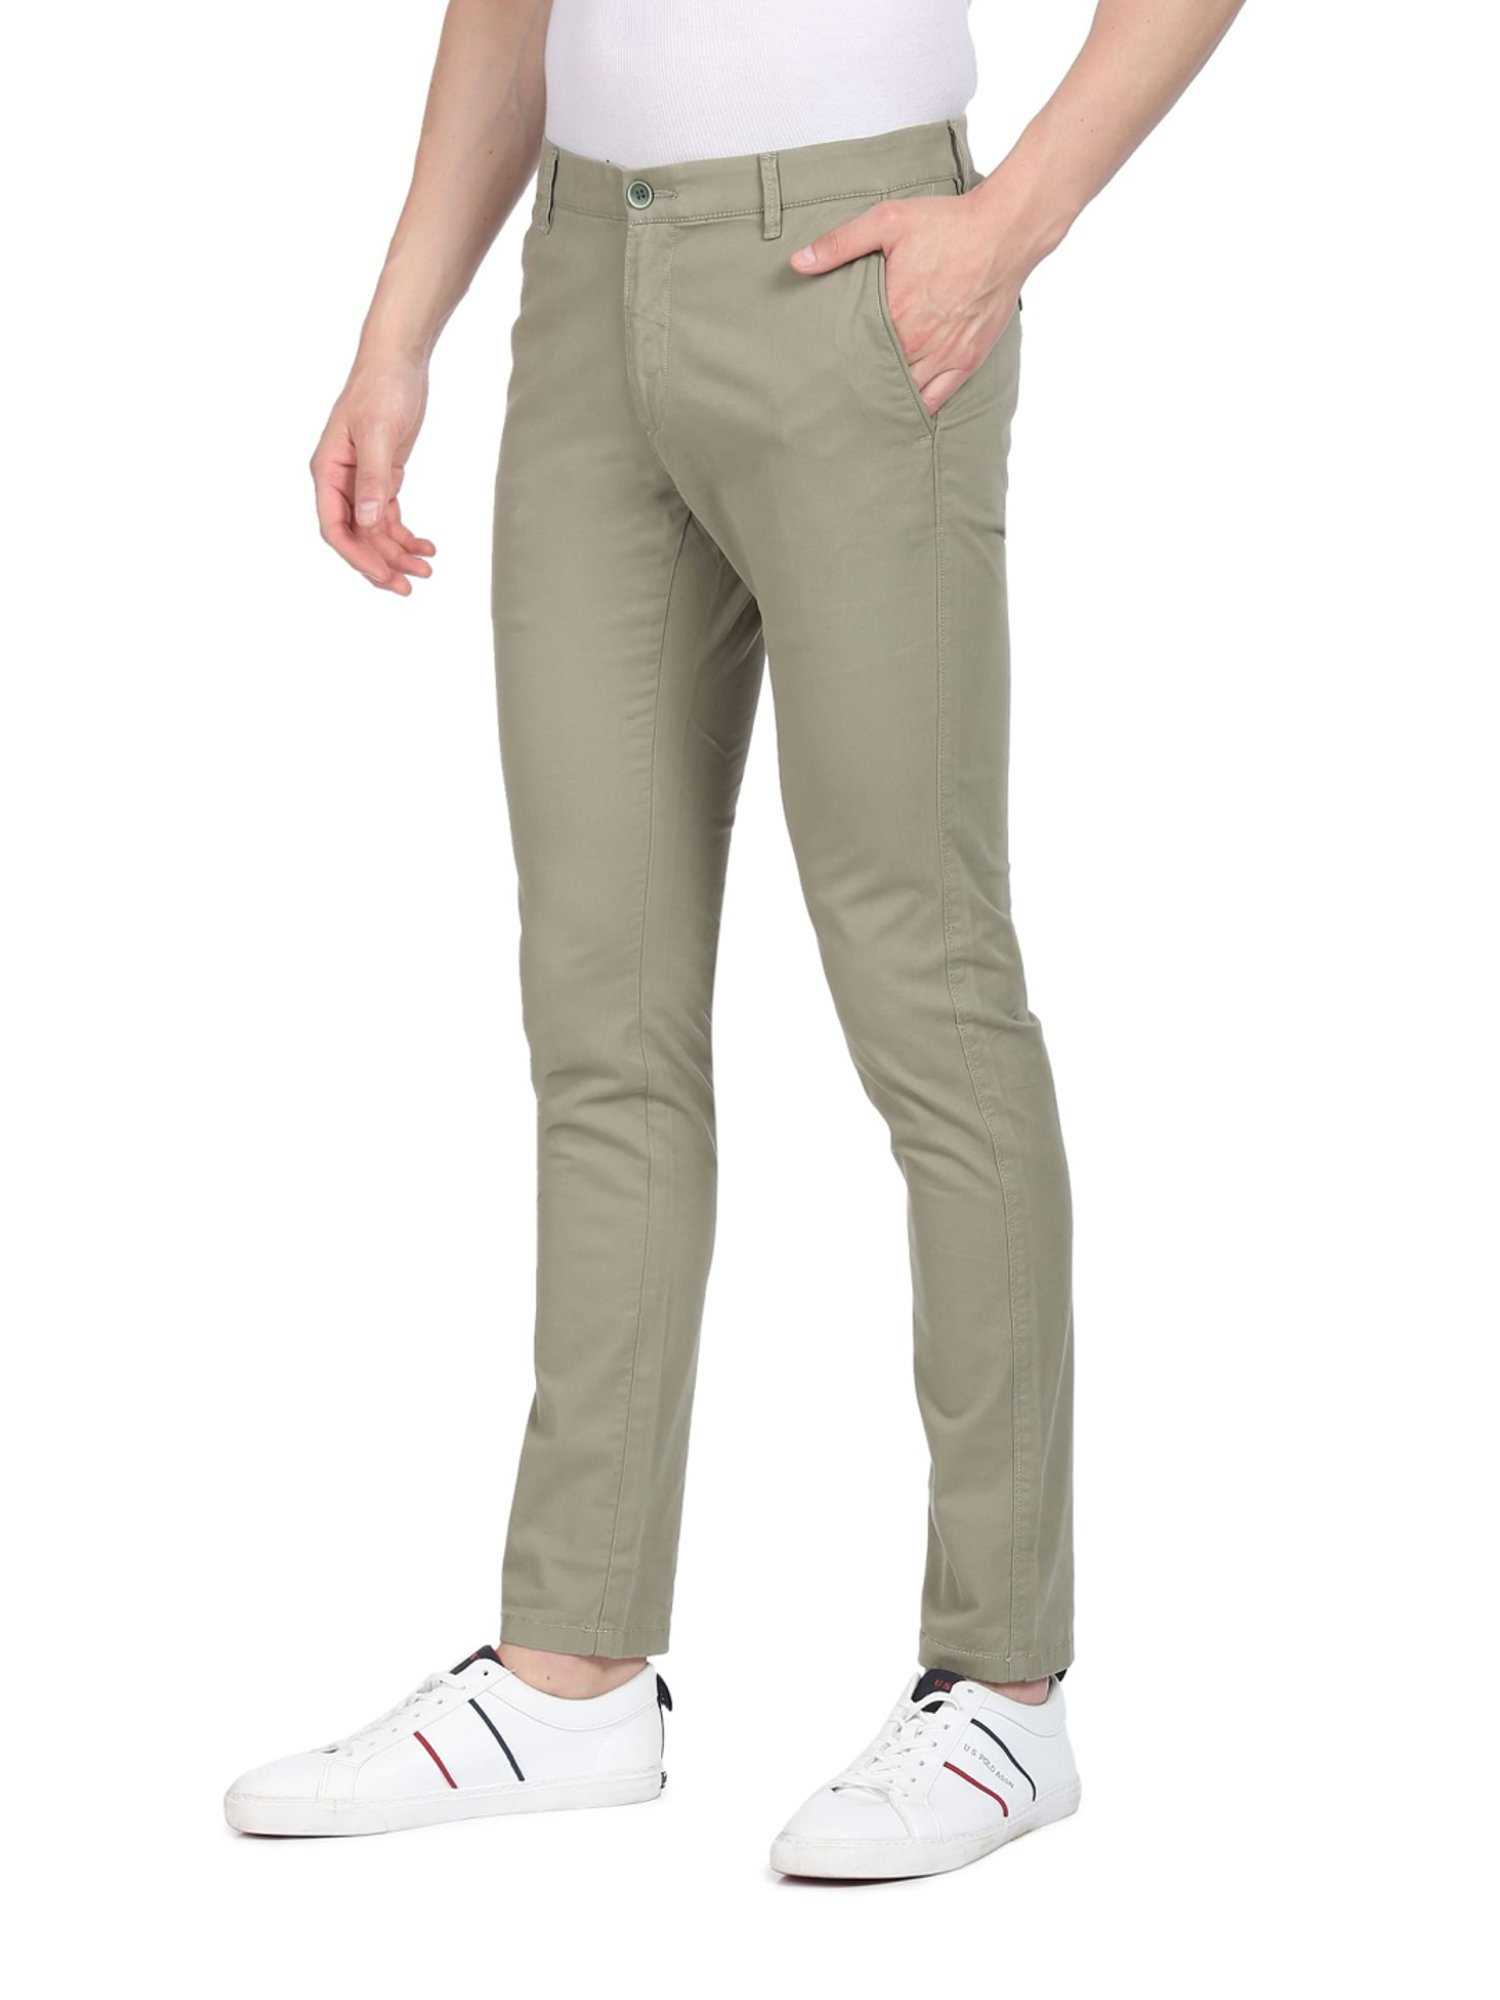 11 Best Cotton Trouser Brands in India  Styling Tips 2023